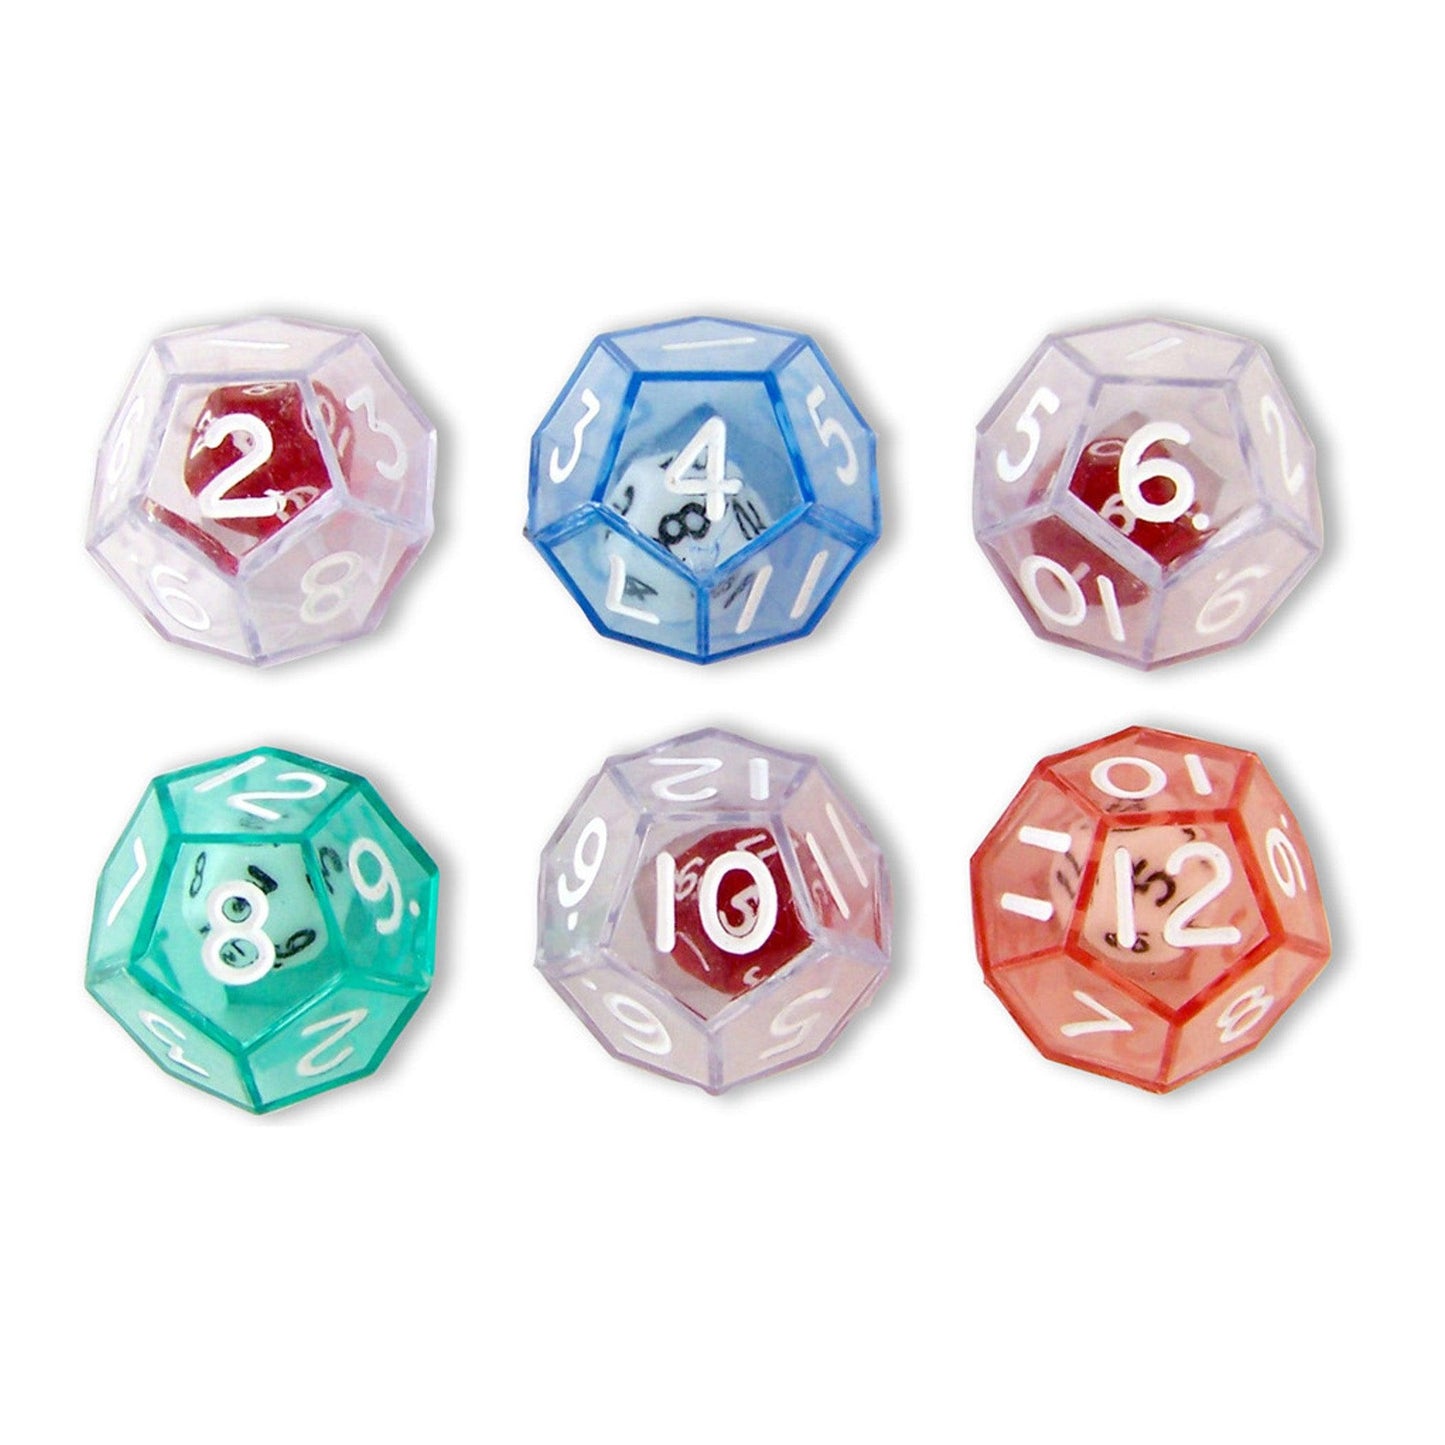 12-Sided Double Dice Set, 6 Per Pack, 3 Packs - Loomini